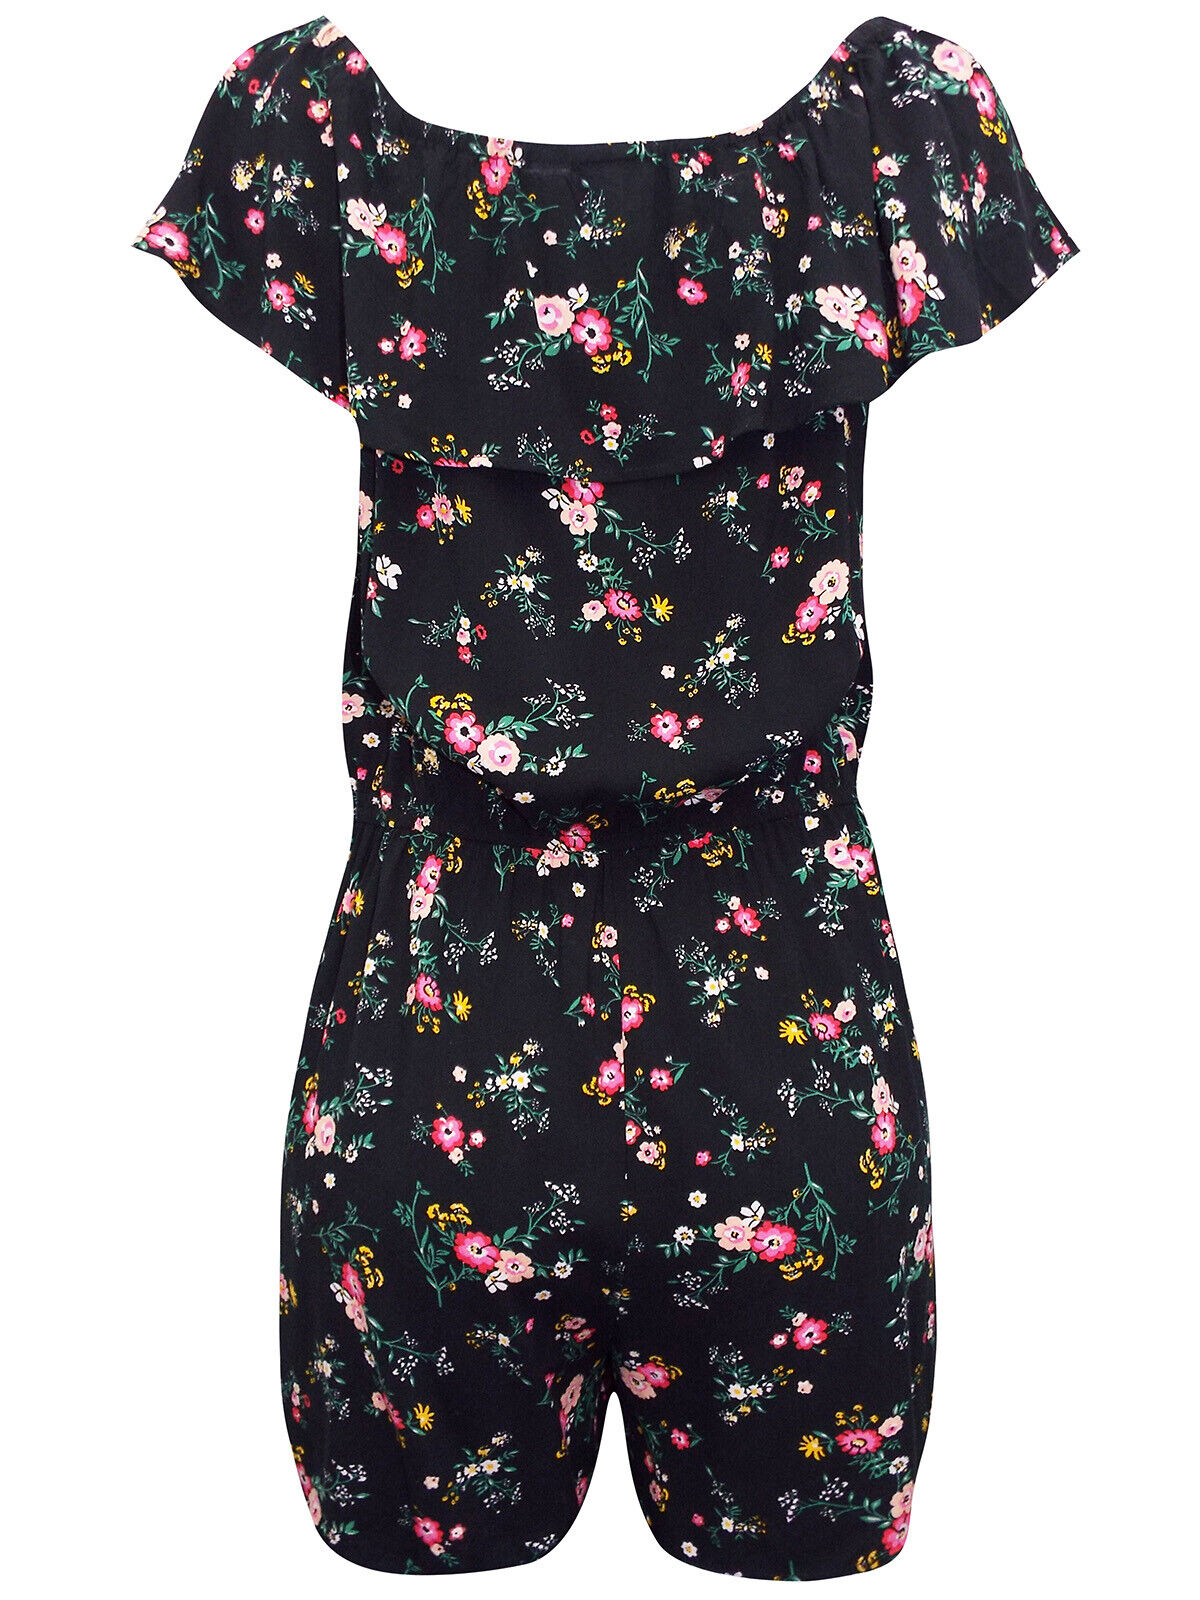 EX Fat Face Black Floral Print Bardot Playsuit in Sizes 8, 12, 14